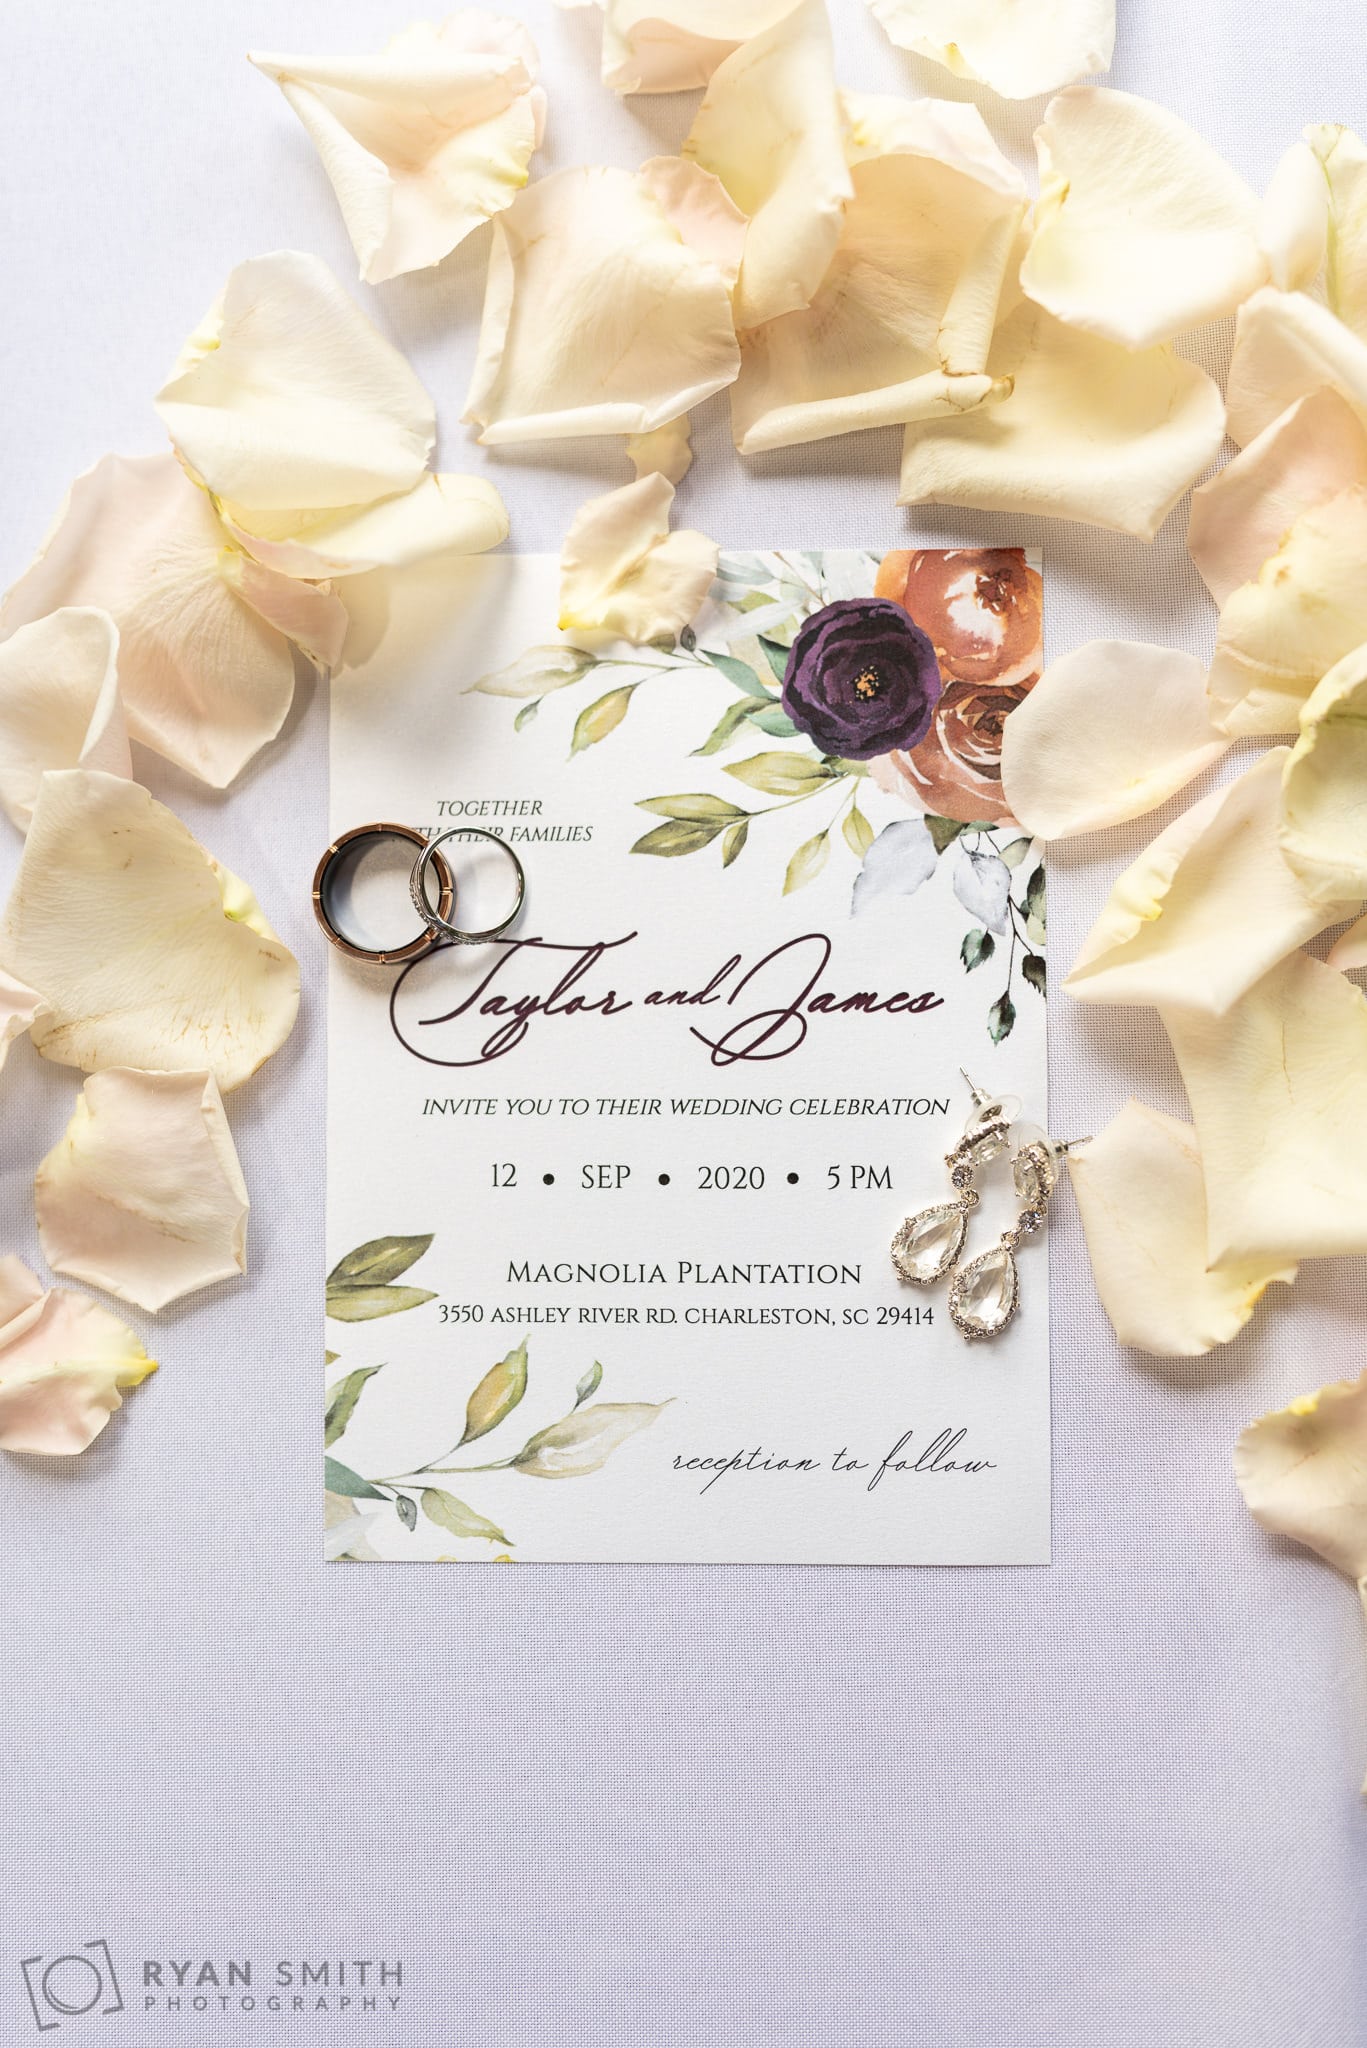 Invitation with rings and earrings  - Magnolia Plantation - Charleston, SC